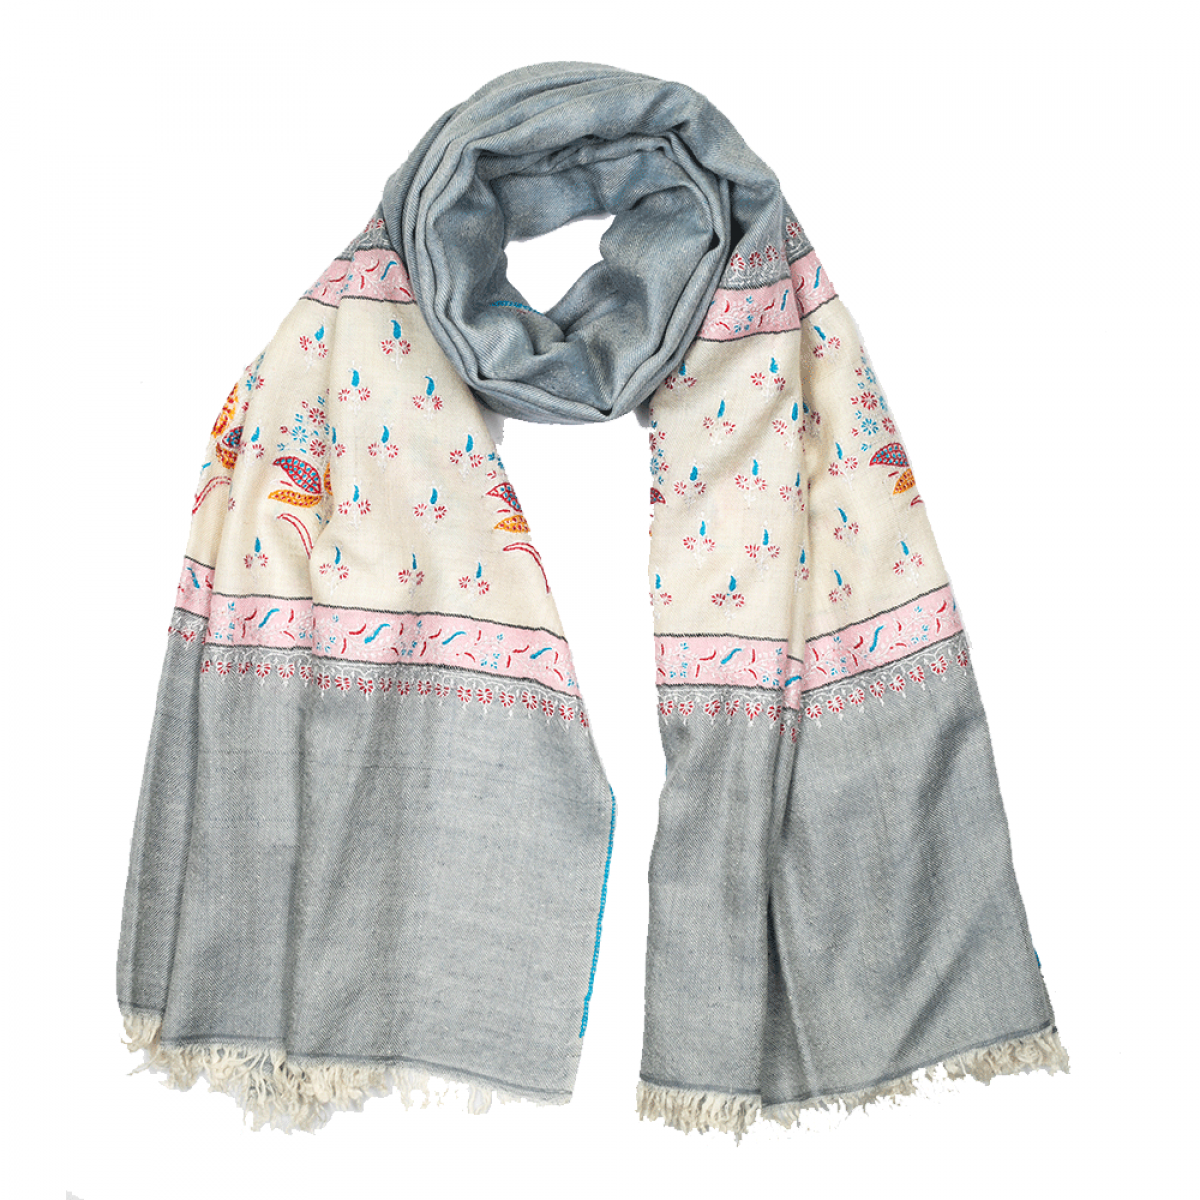 Embroidered Pashmina Stole - Blue Jeans & Blue